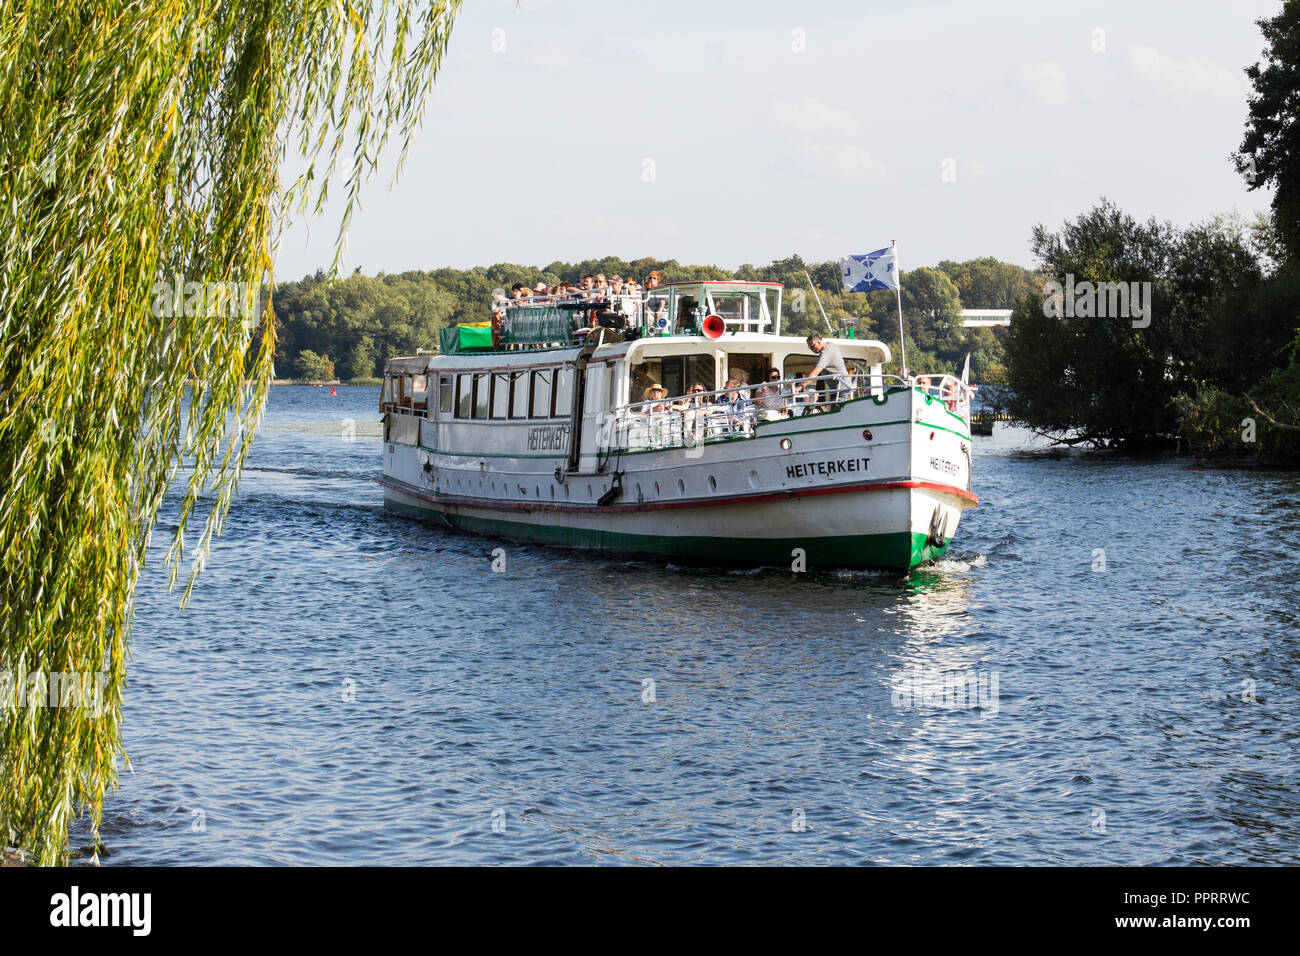 The pleasure boat Heiterkeit arriving at Kladow to pick up passengers for a short cruise Stock Photo